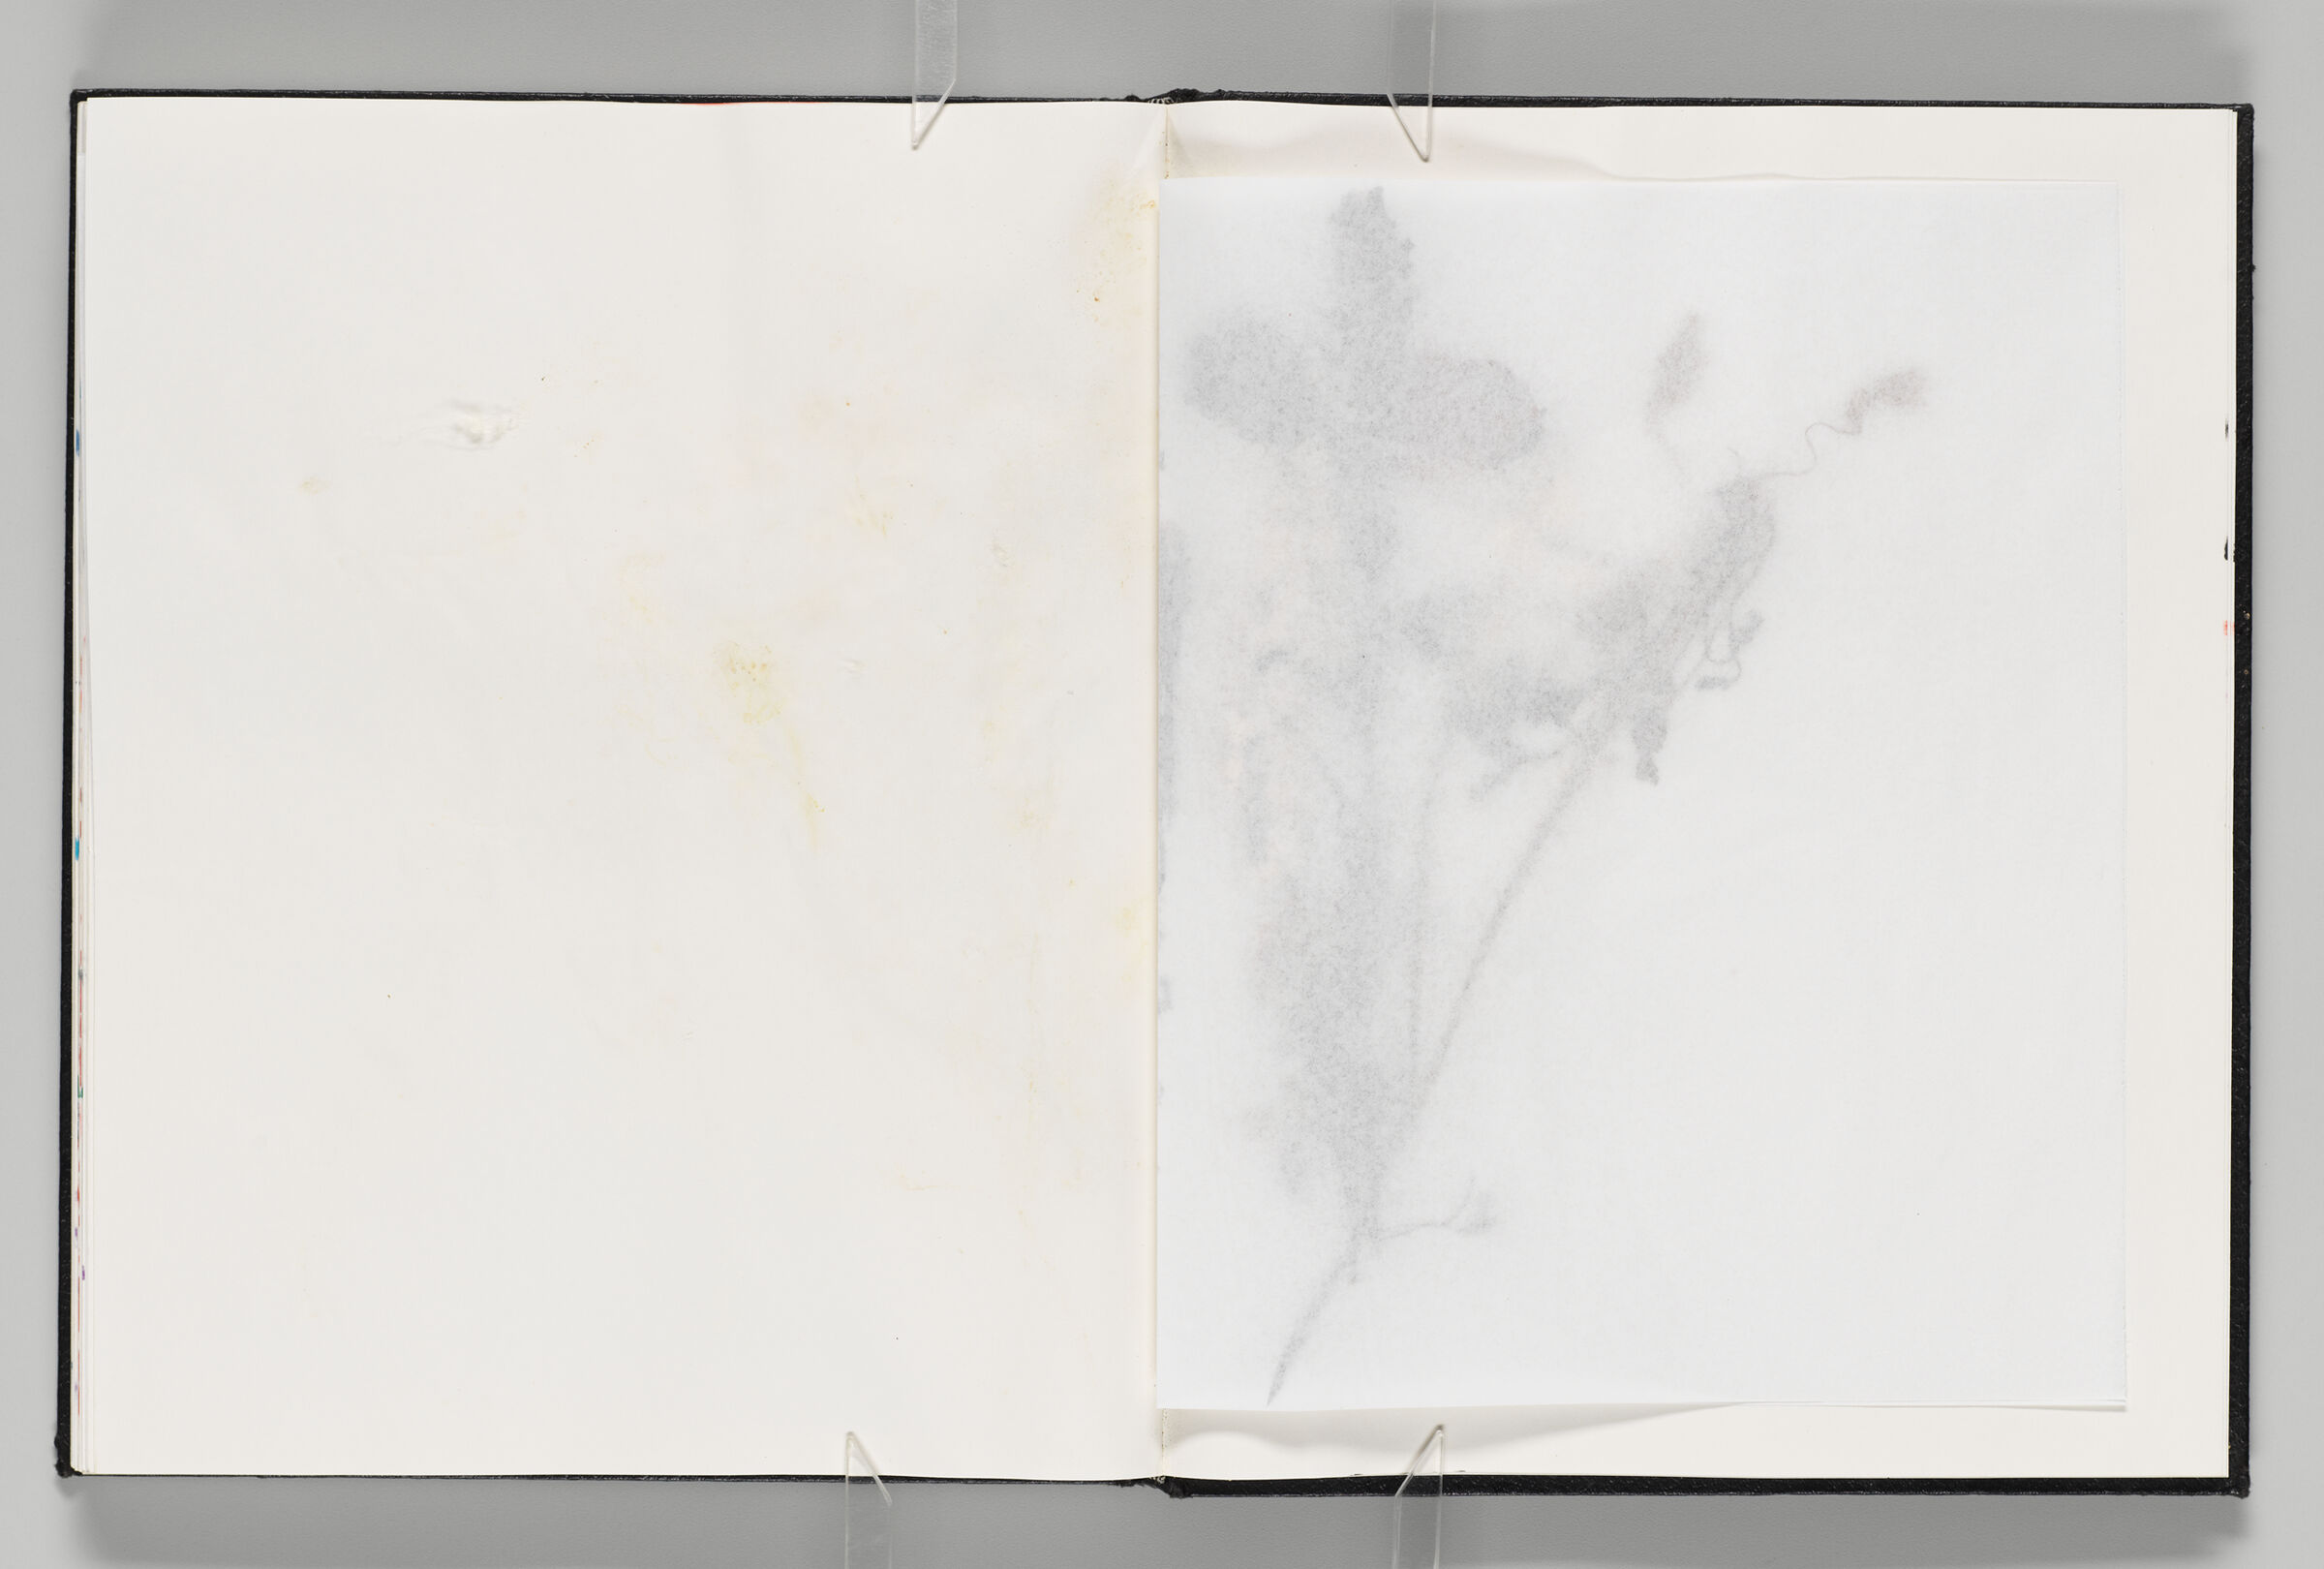 Untitled (Page Of Photocopied Letter, Left Page); Untitled (Page Of Photocopied Letter, Right Page)